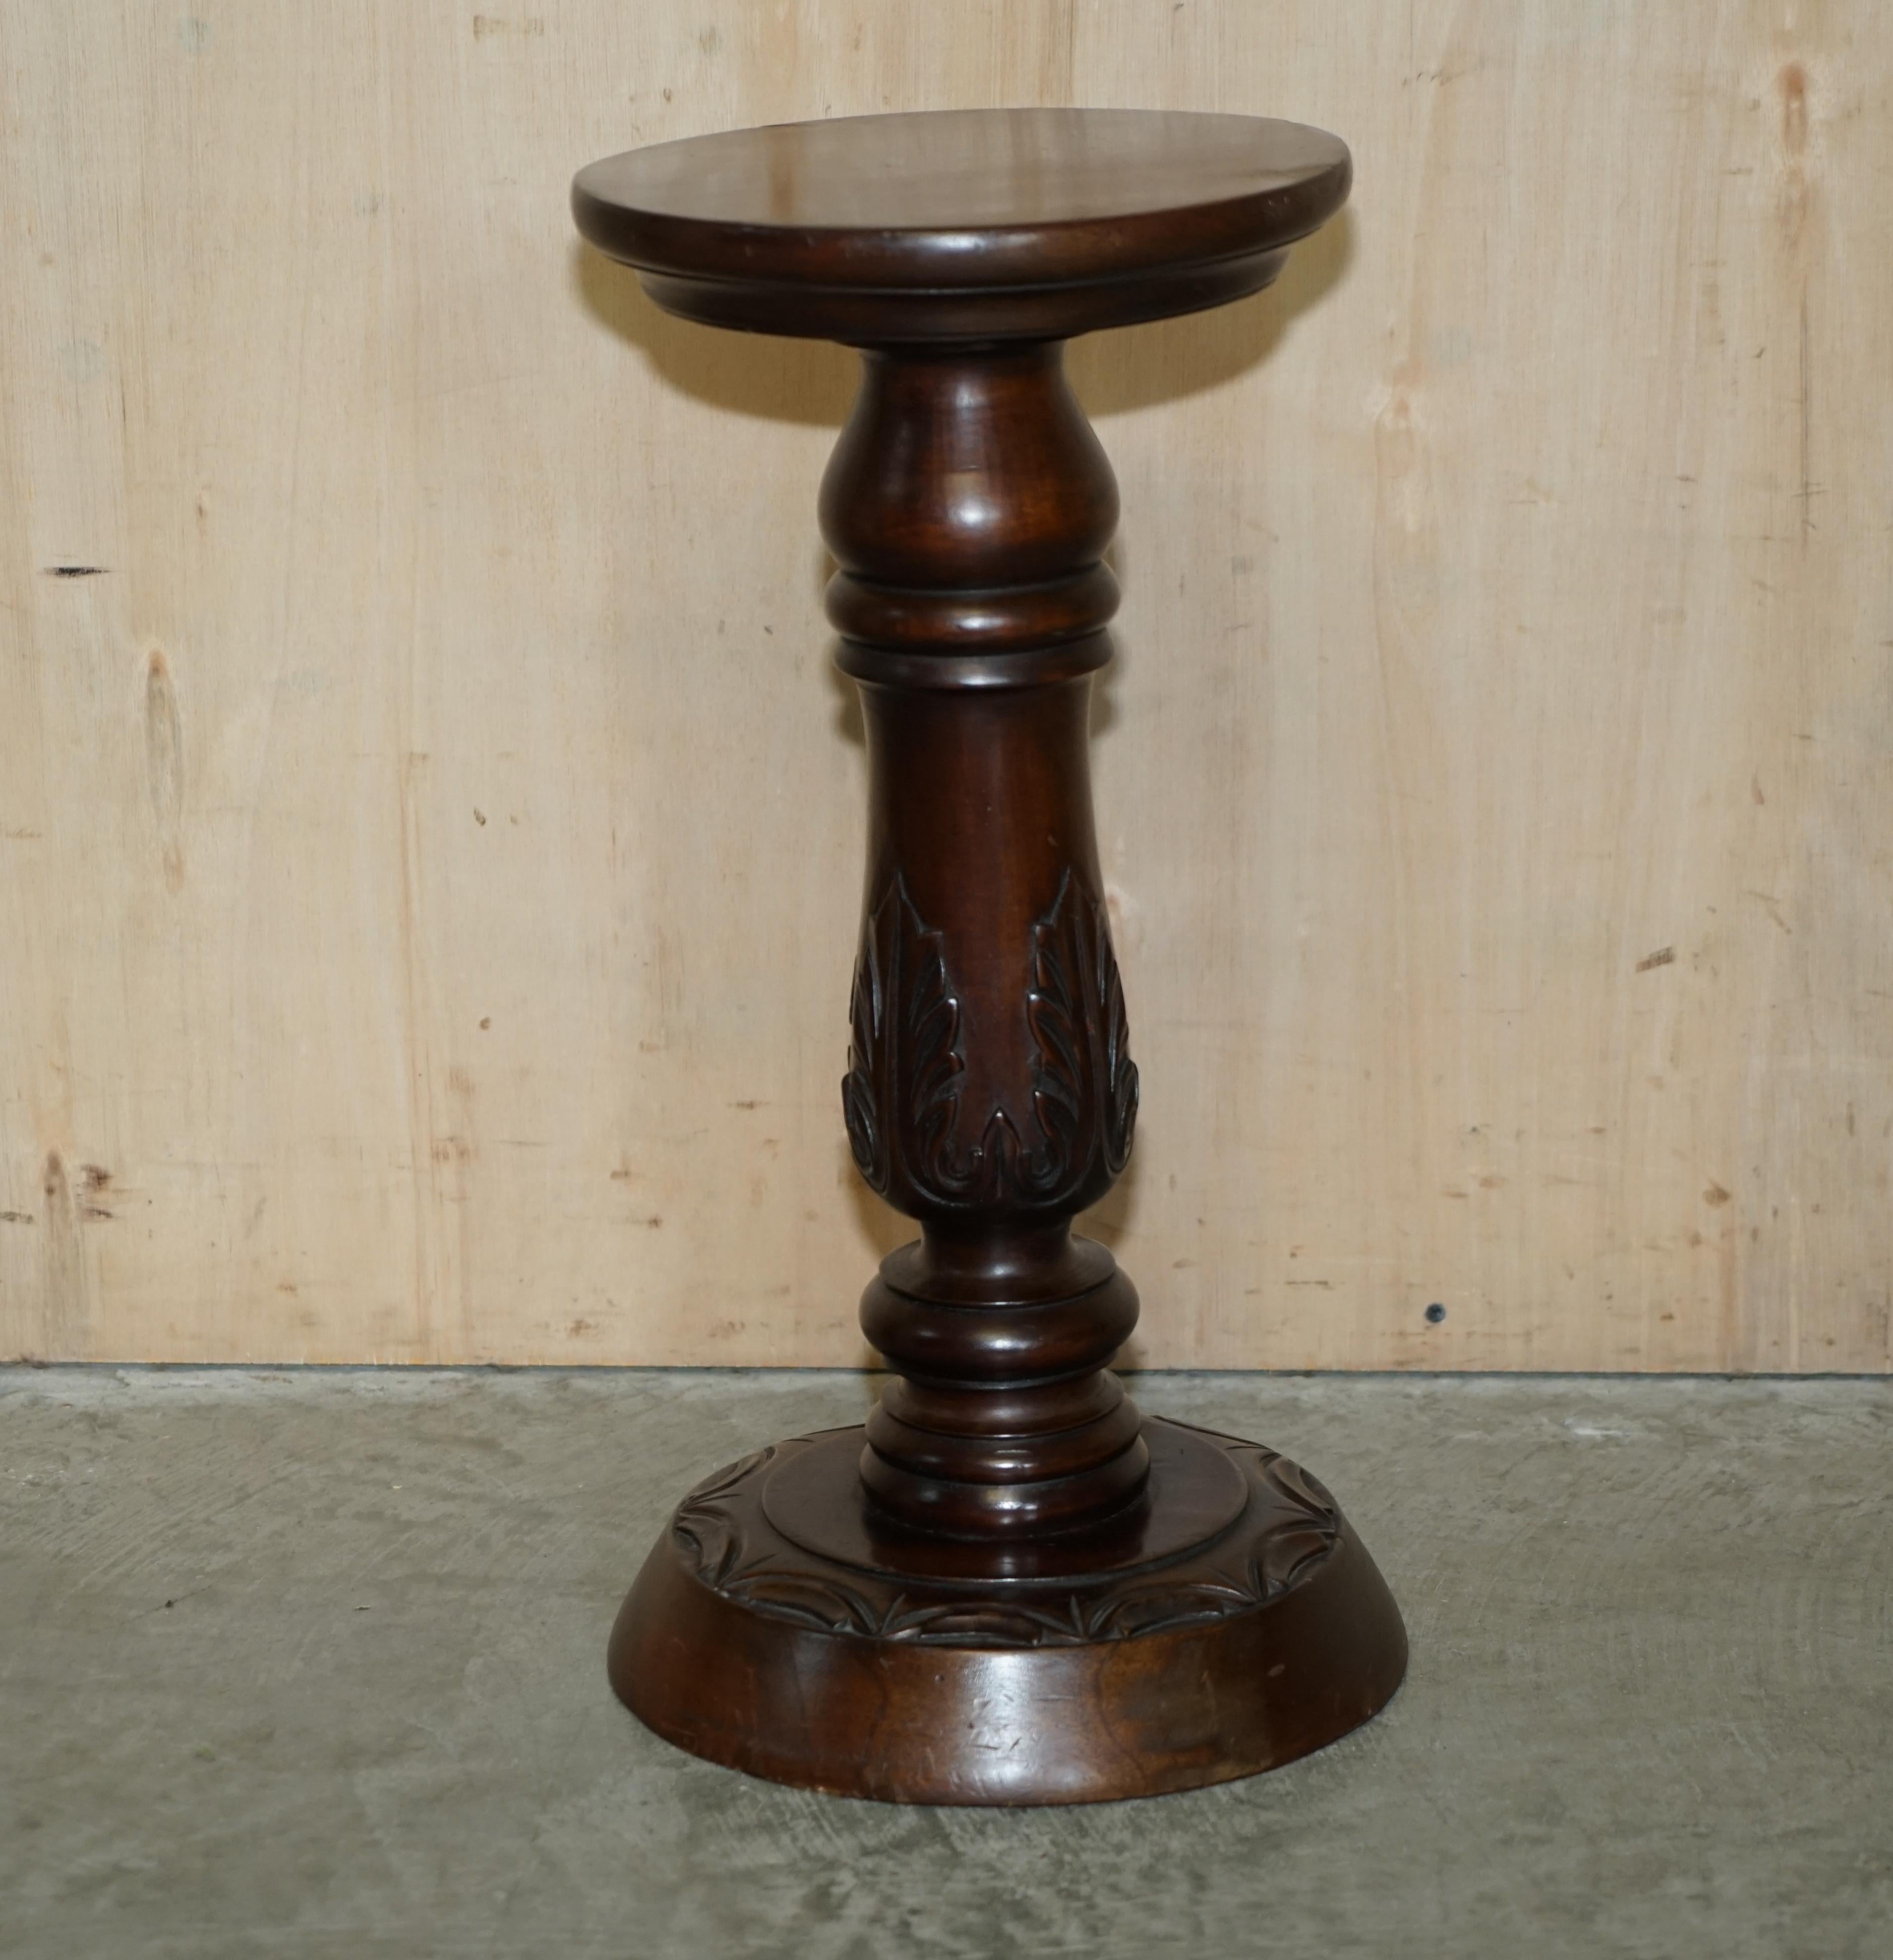 We are delighted to offer for sale this lovely hand carved pillar with floral detailing.

A very well-made piece, this is vintage piece in solid oak, its very decorative and works well in any setting 

The timber has all been cleaned waxed and